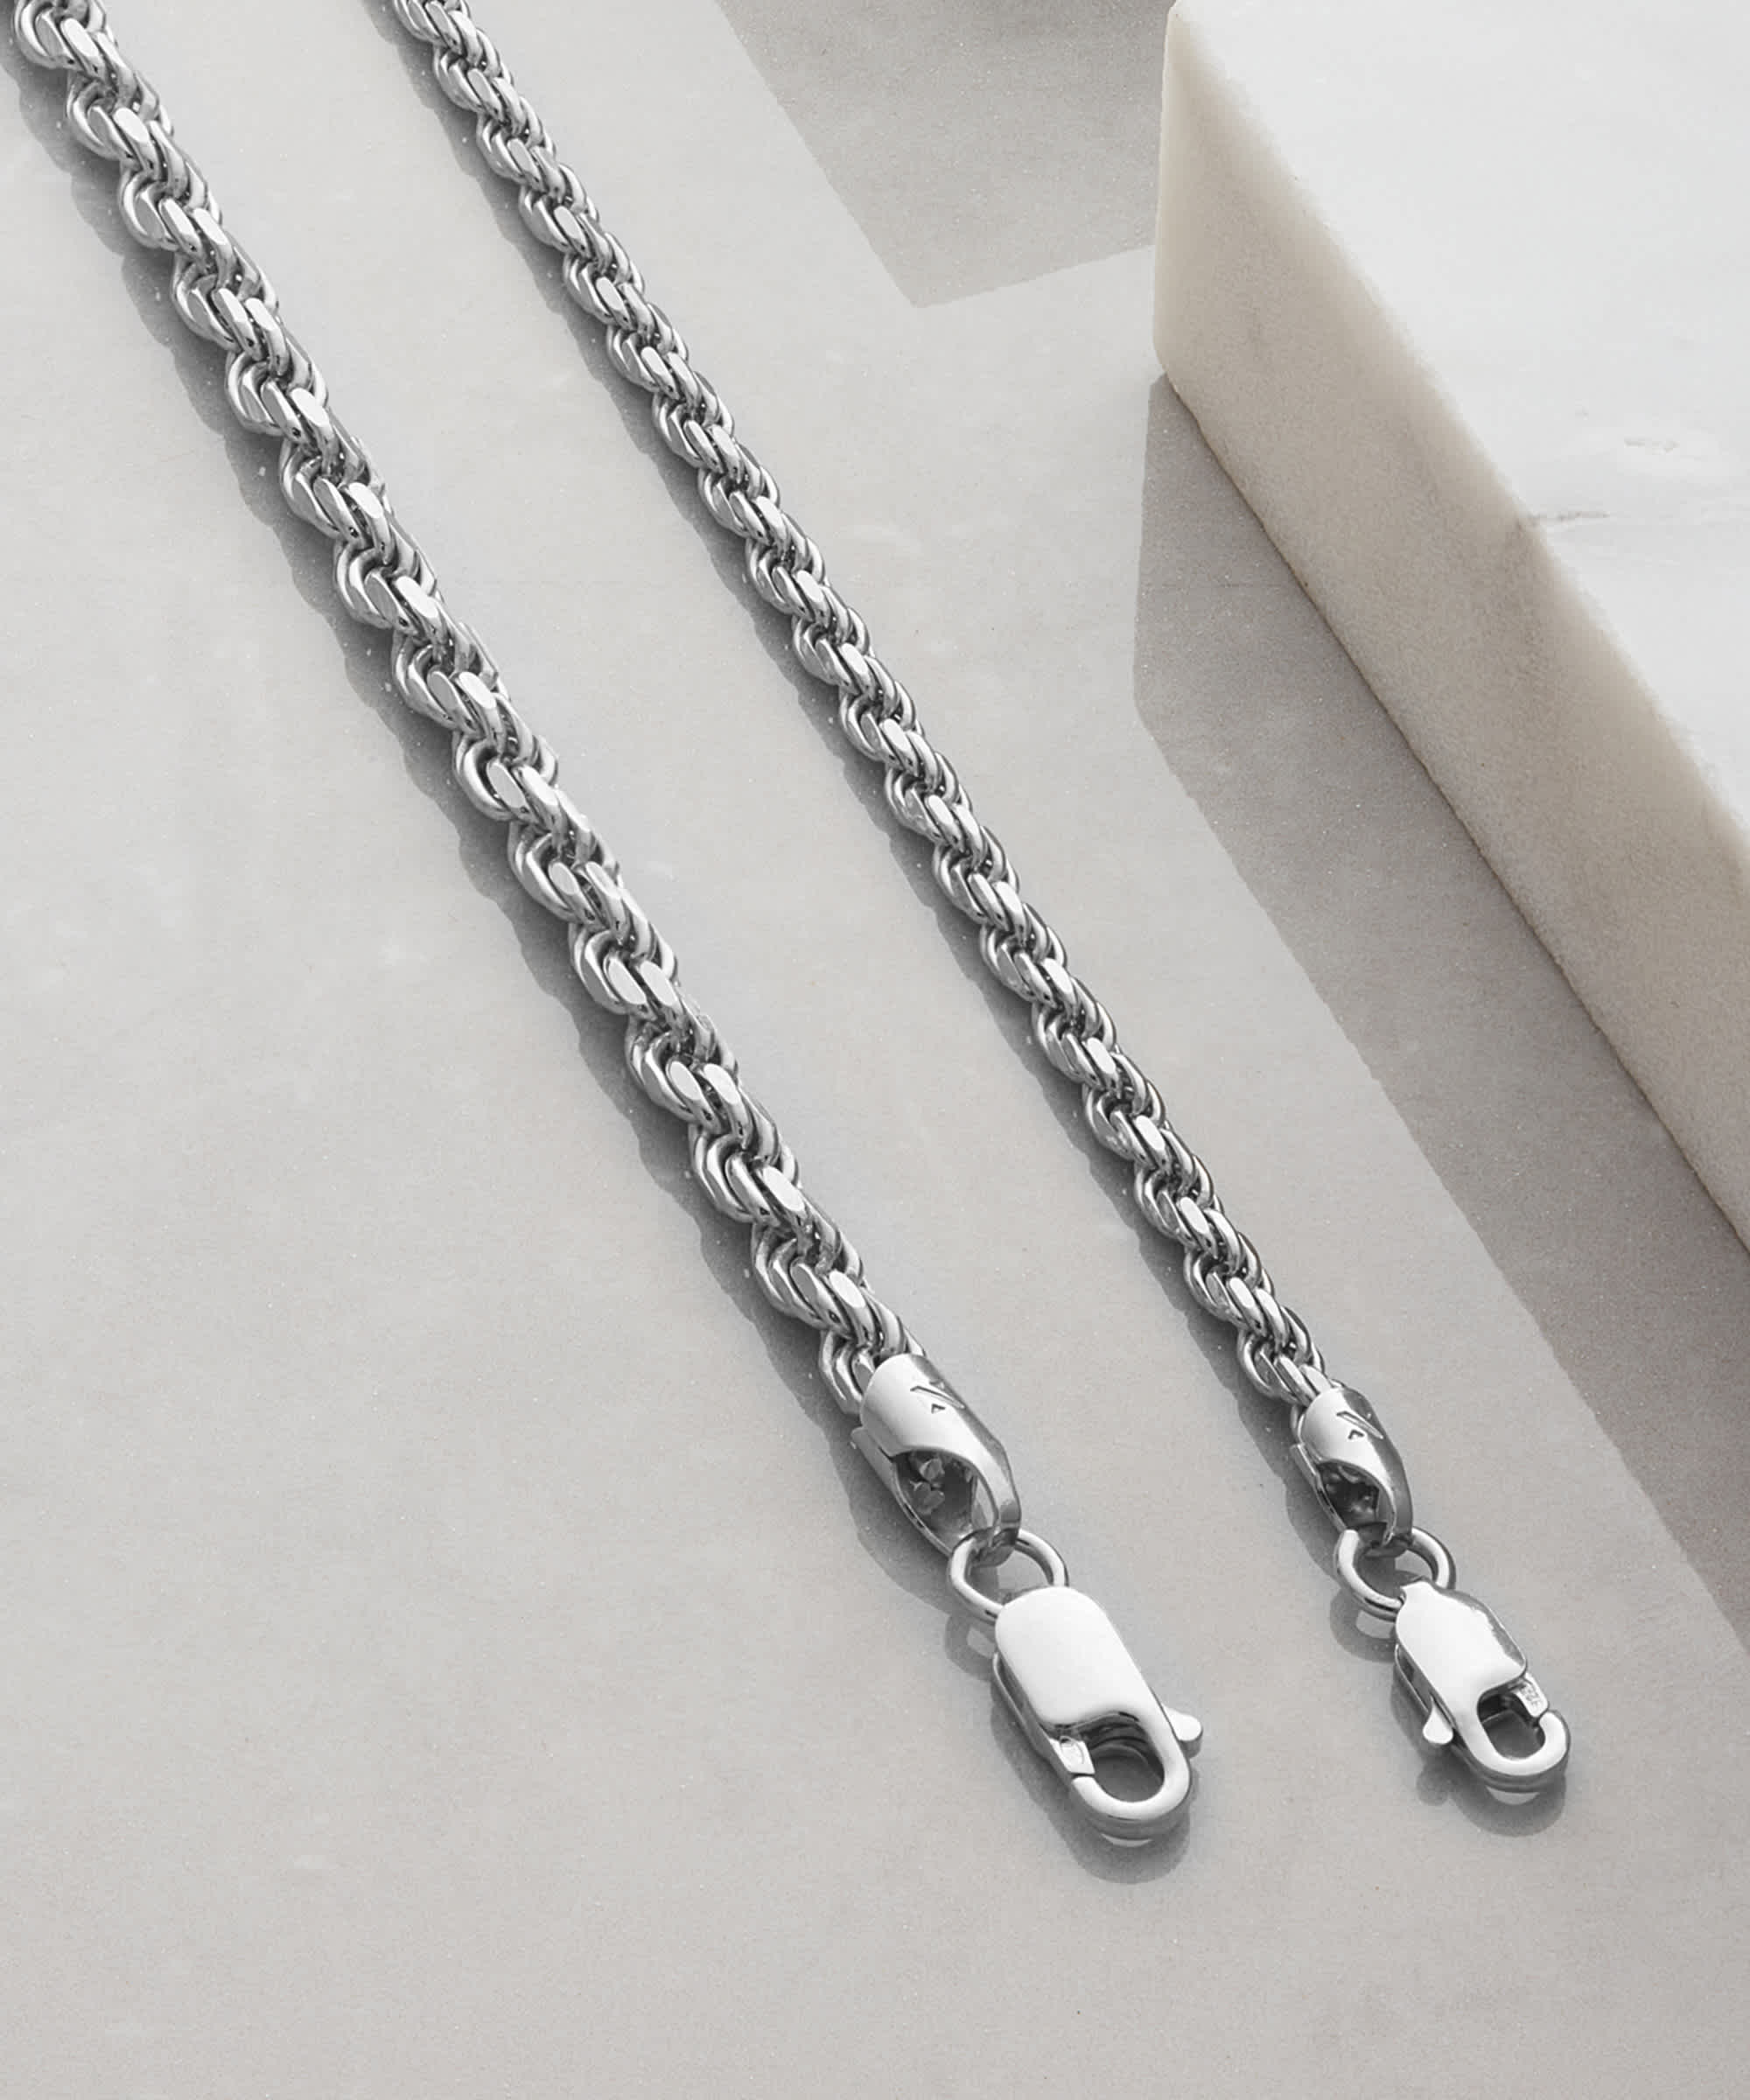 Italian Made - Rope Chain Silver